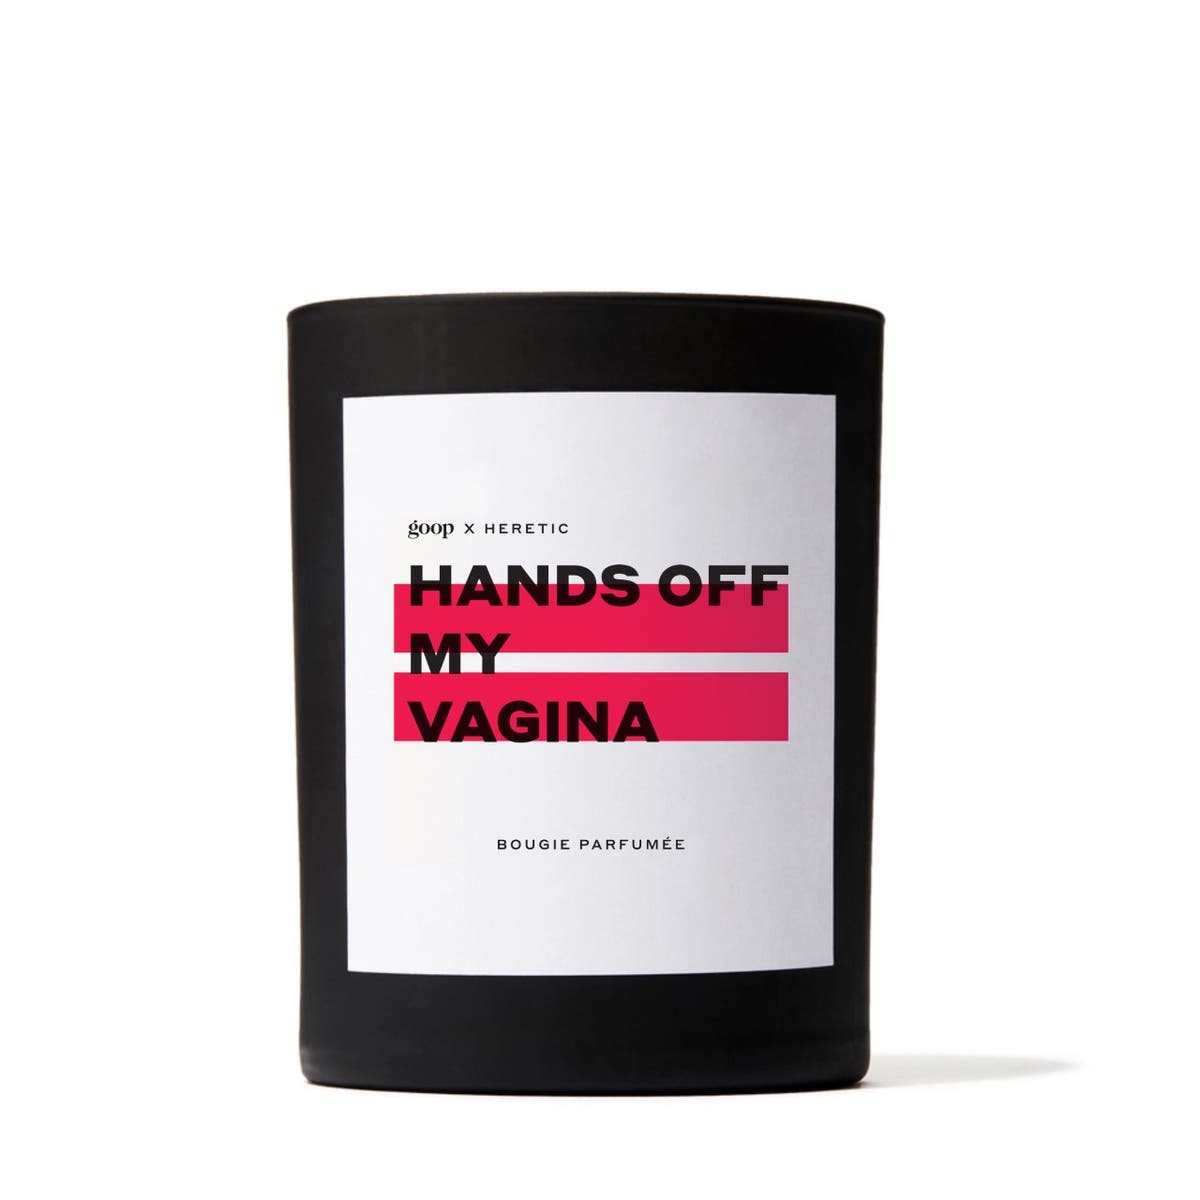 Gwyneth Paltrow’s Goop launches new candle in support of reproductive rights